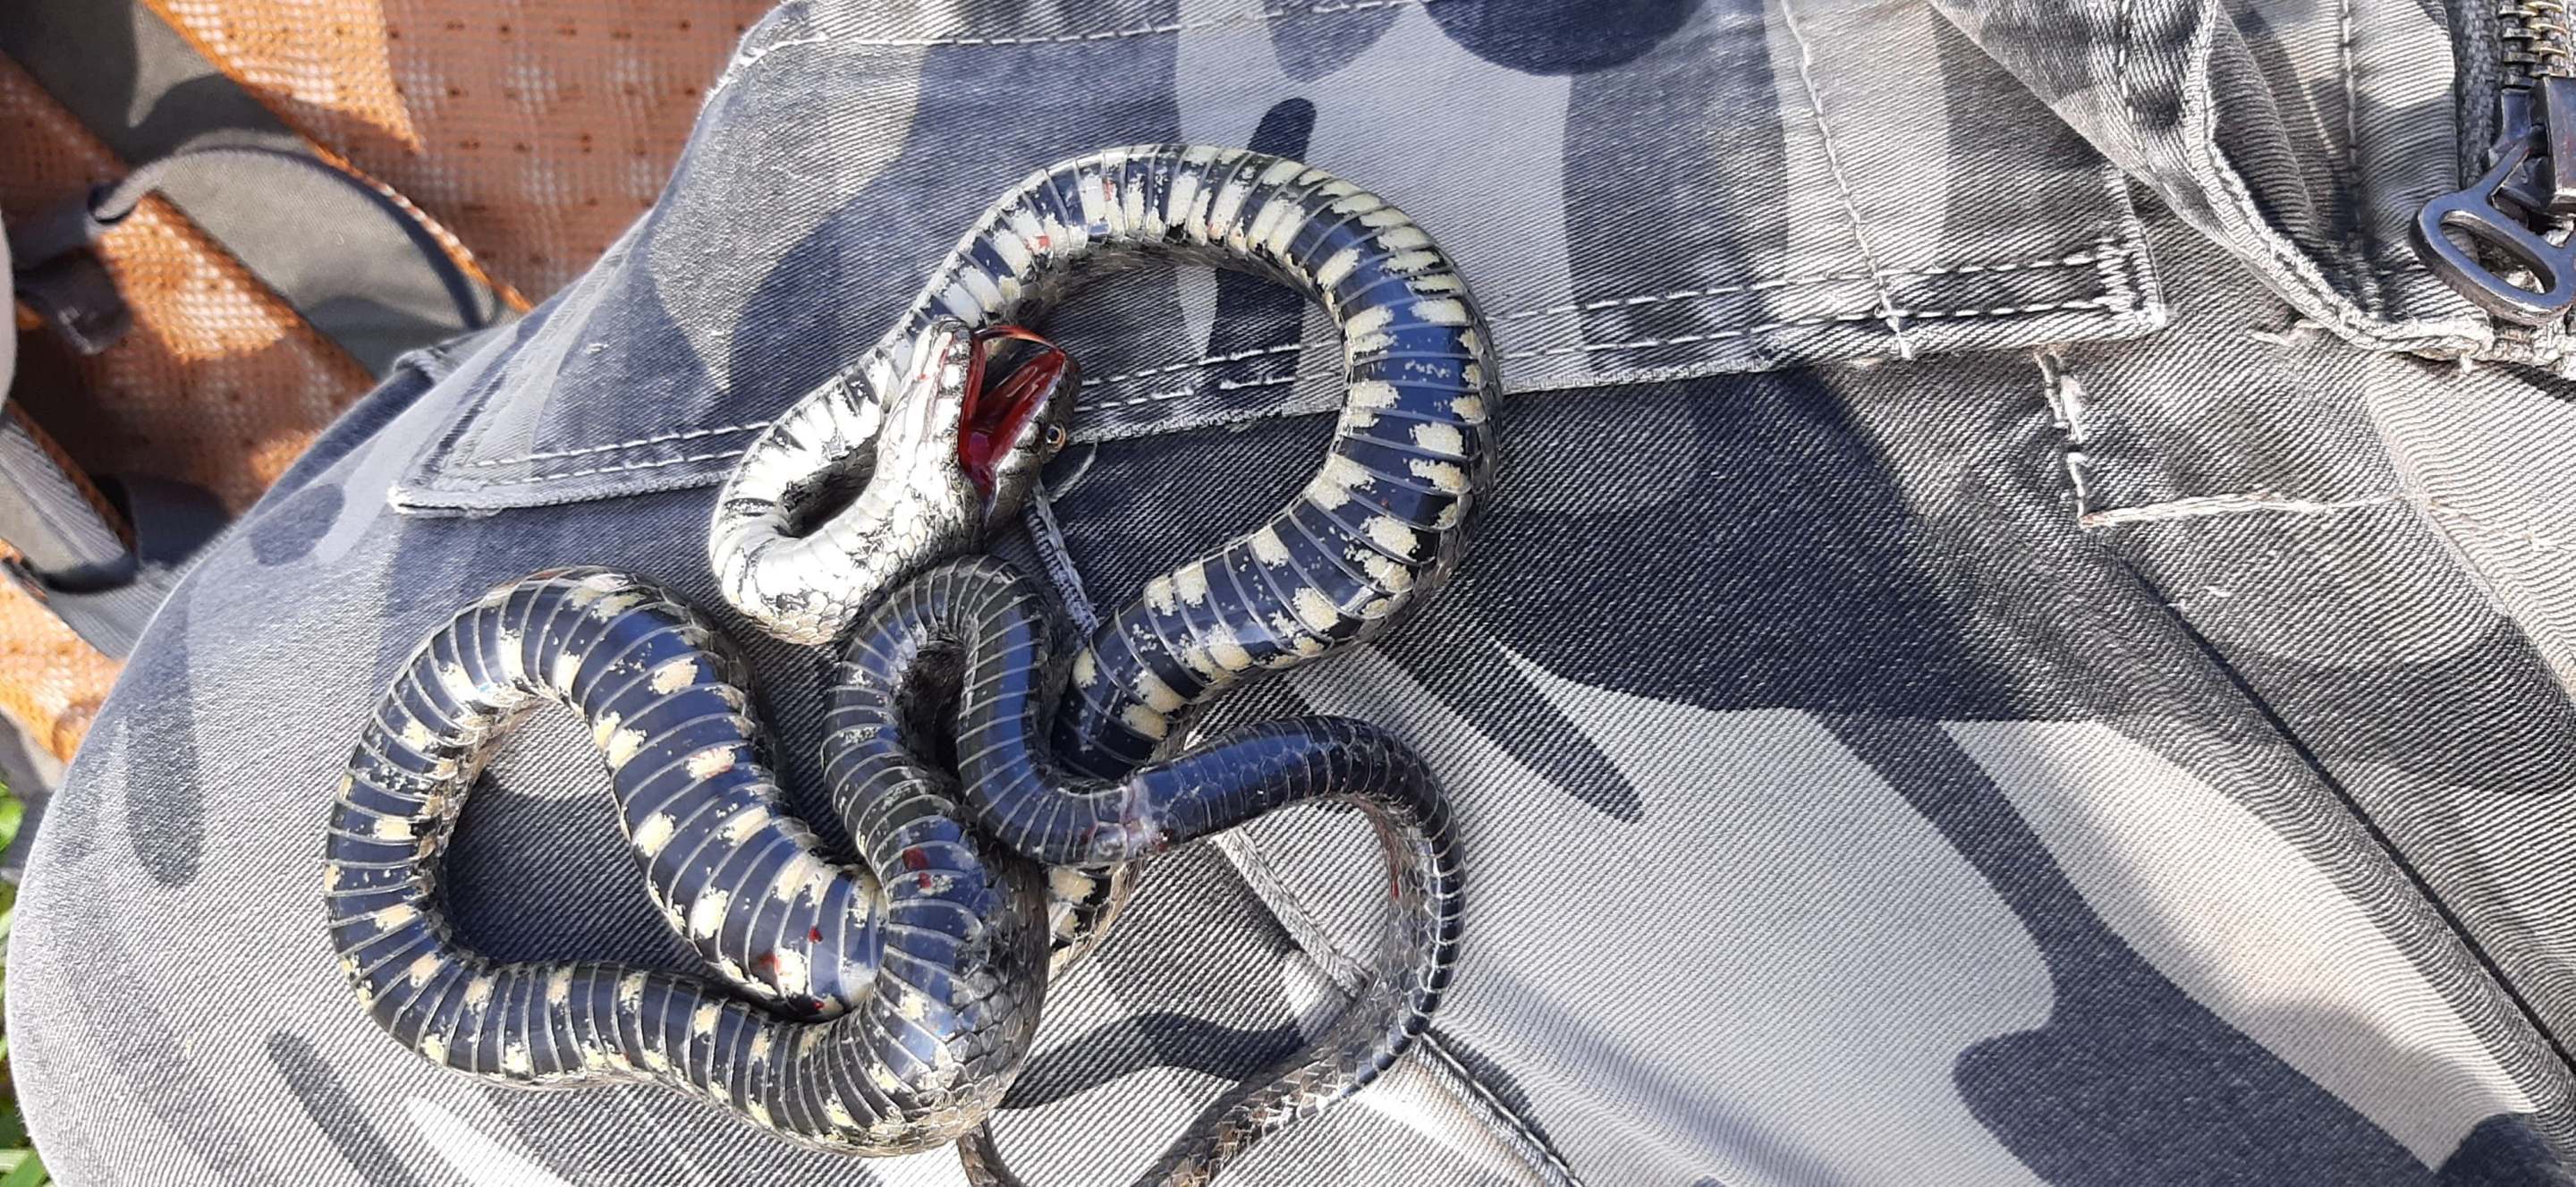 a dice snake feigning death on top of a camouflage piece of clothing